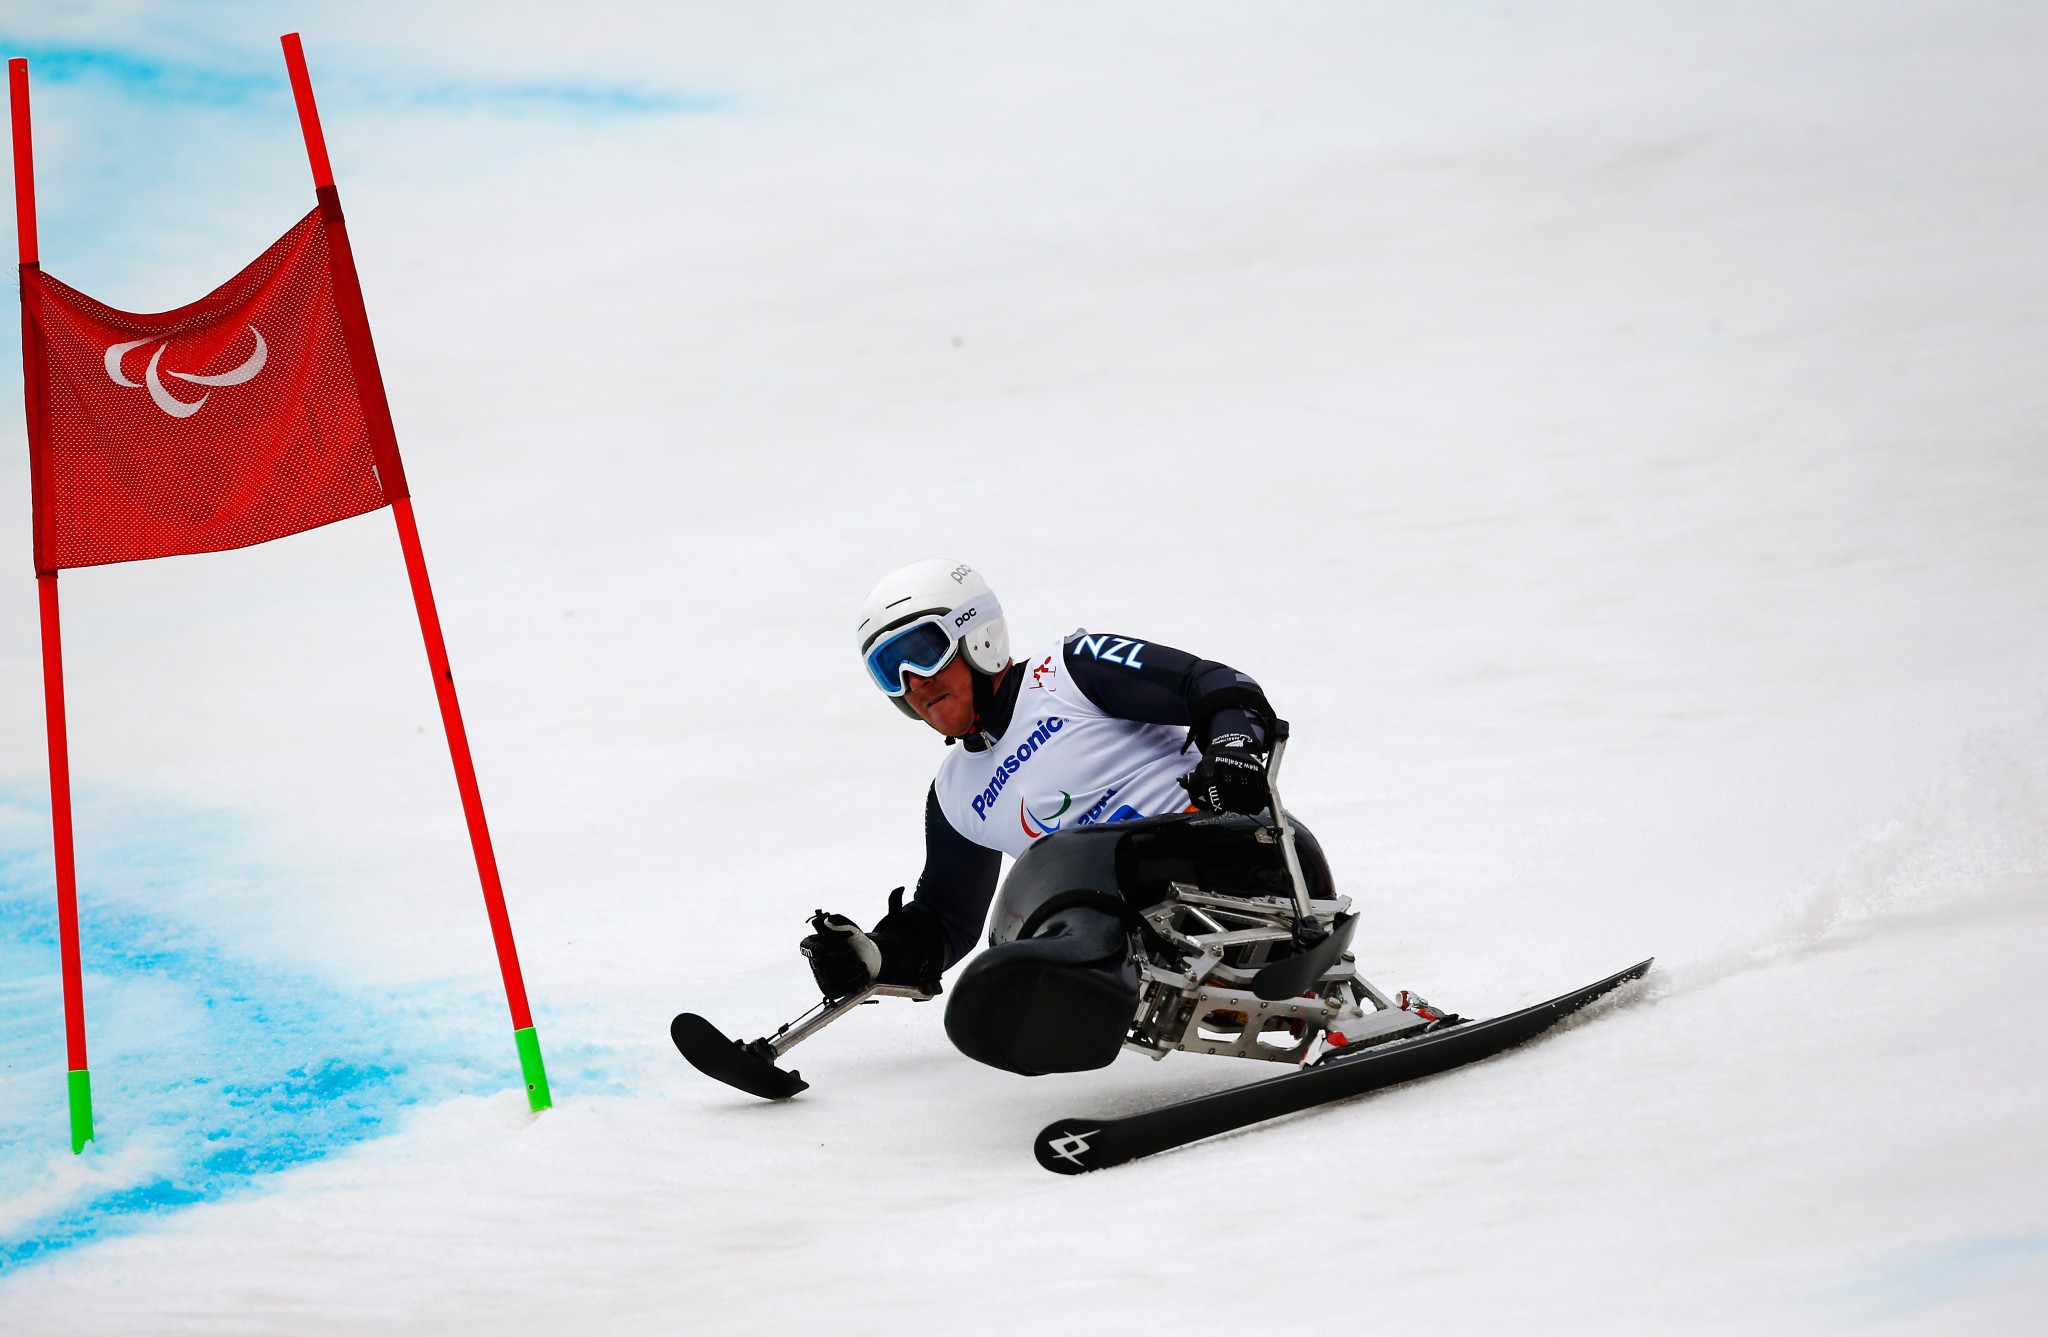 Corey Peters earned a silver medal at the Sochi 2014 Winter Paralympics ©Getty Images